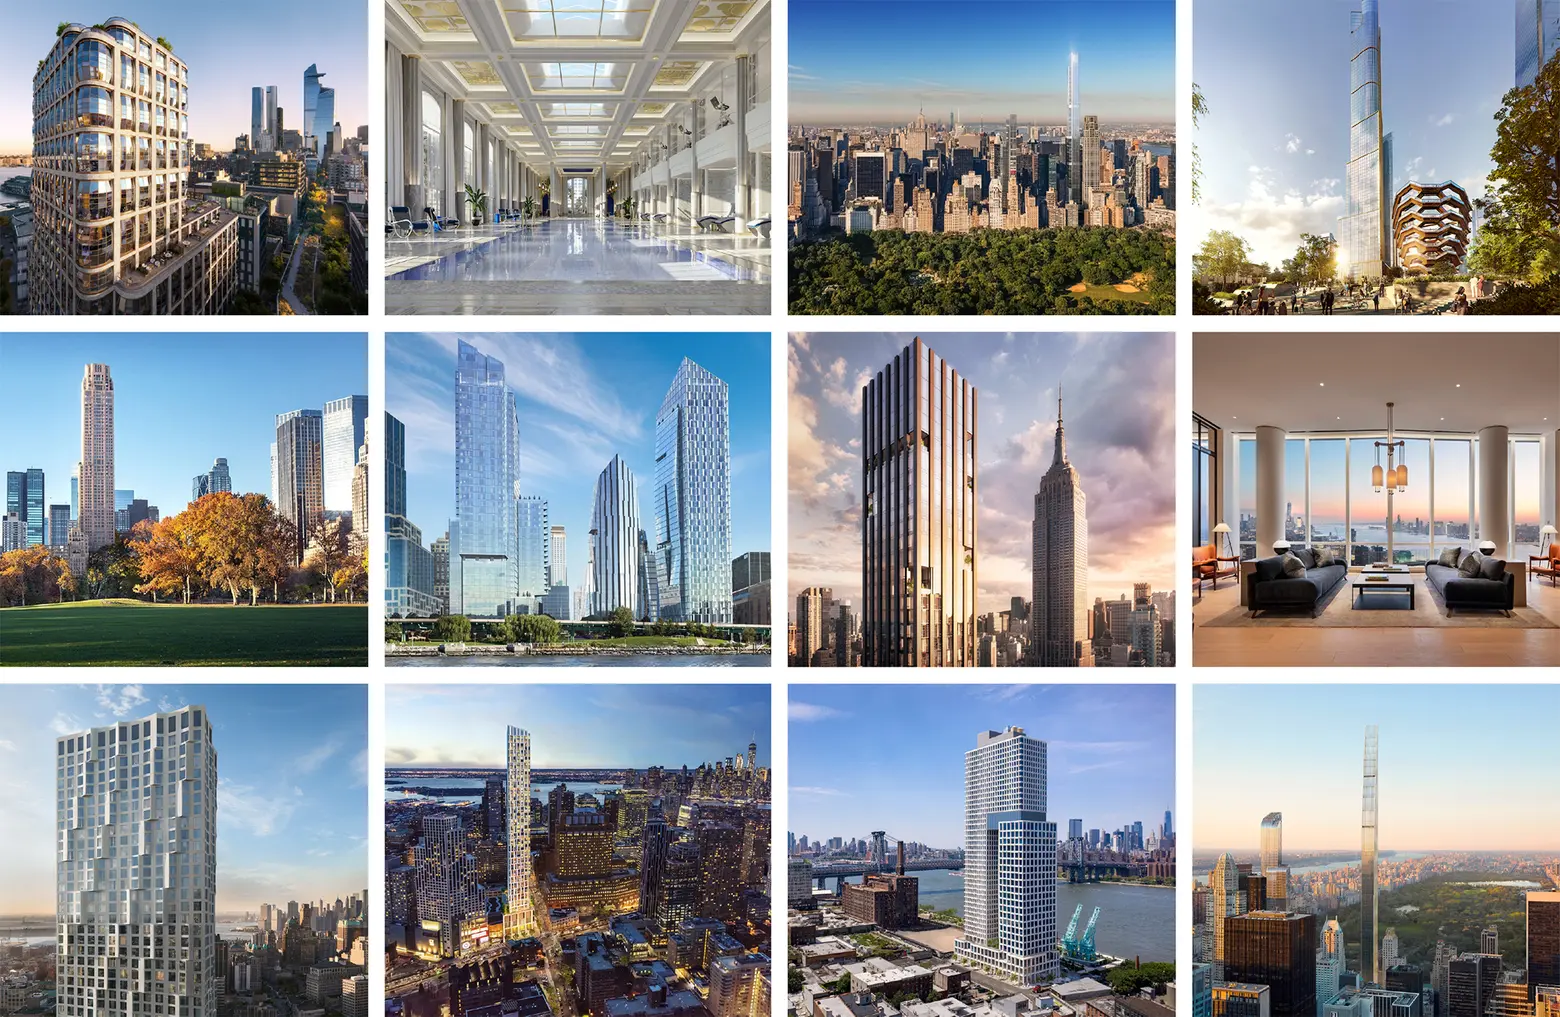 VOTE for 6sqft’s 2020 Building of the Year!